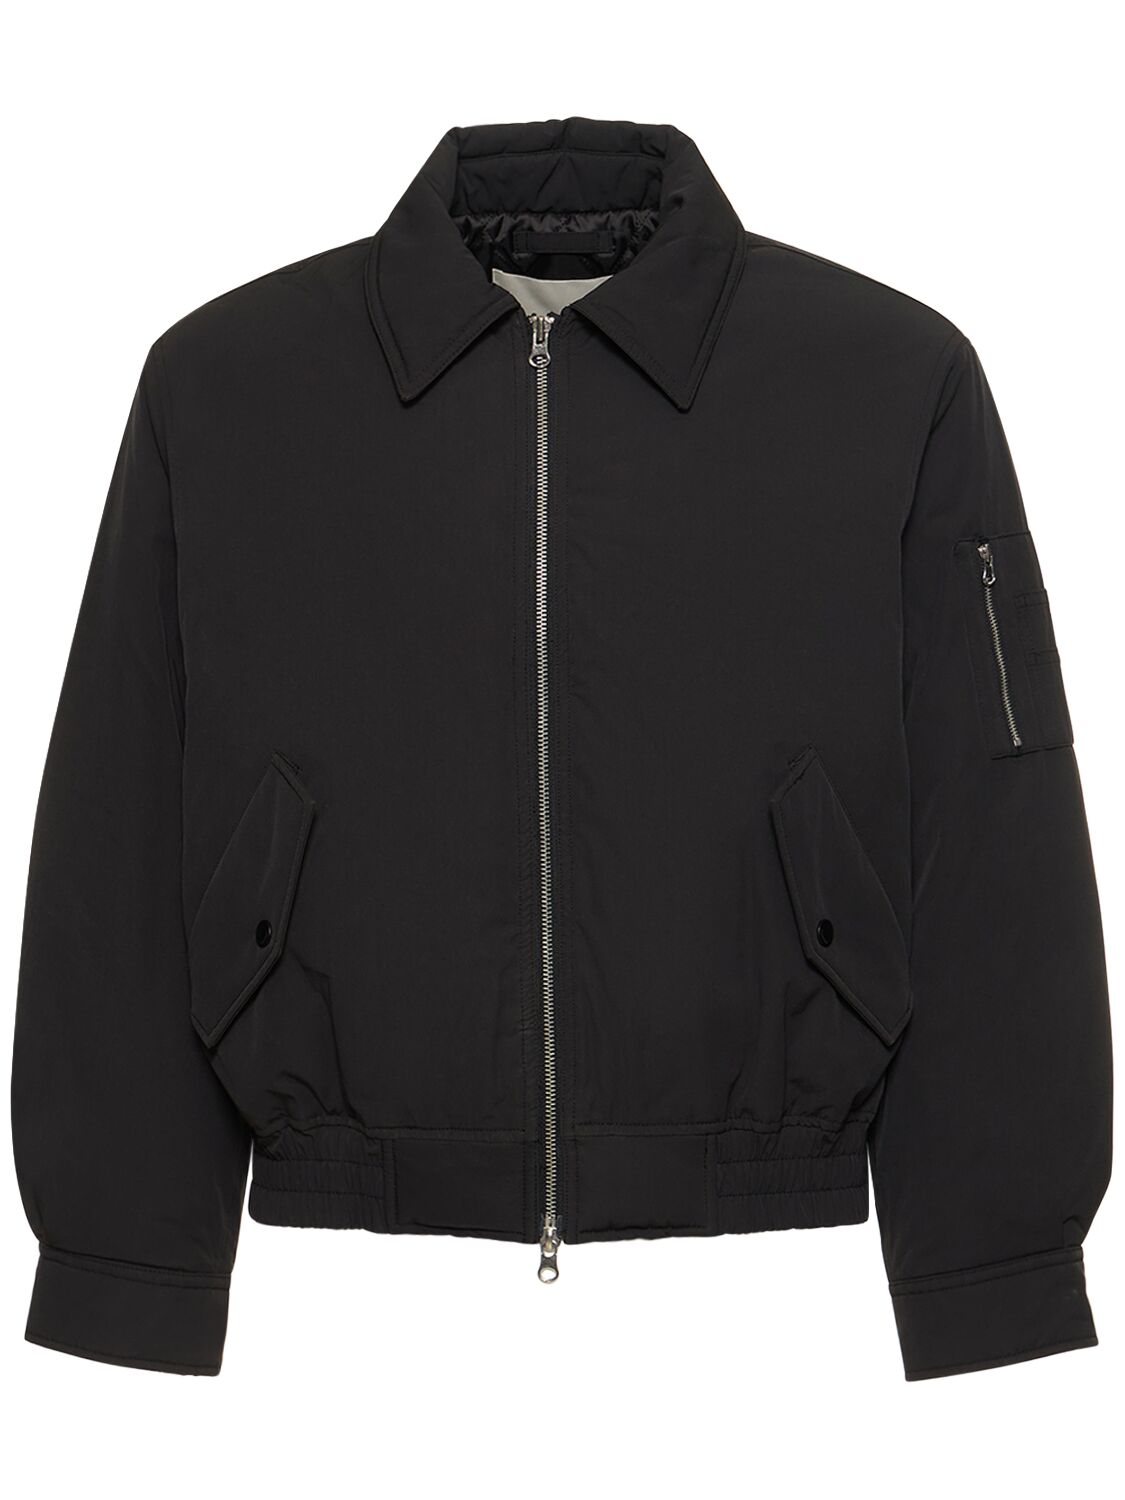 Classic Collared Bomber Jacket